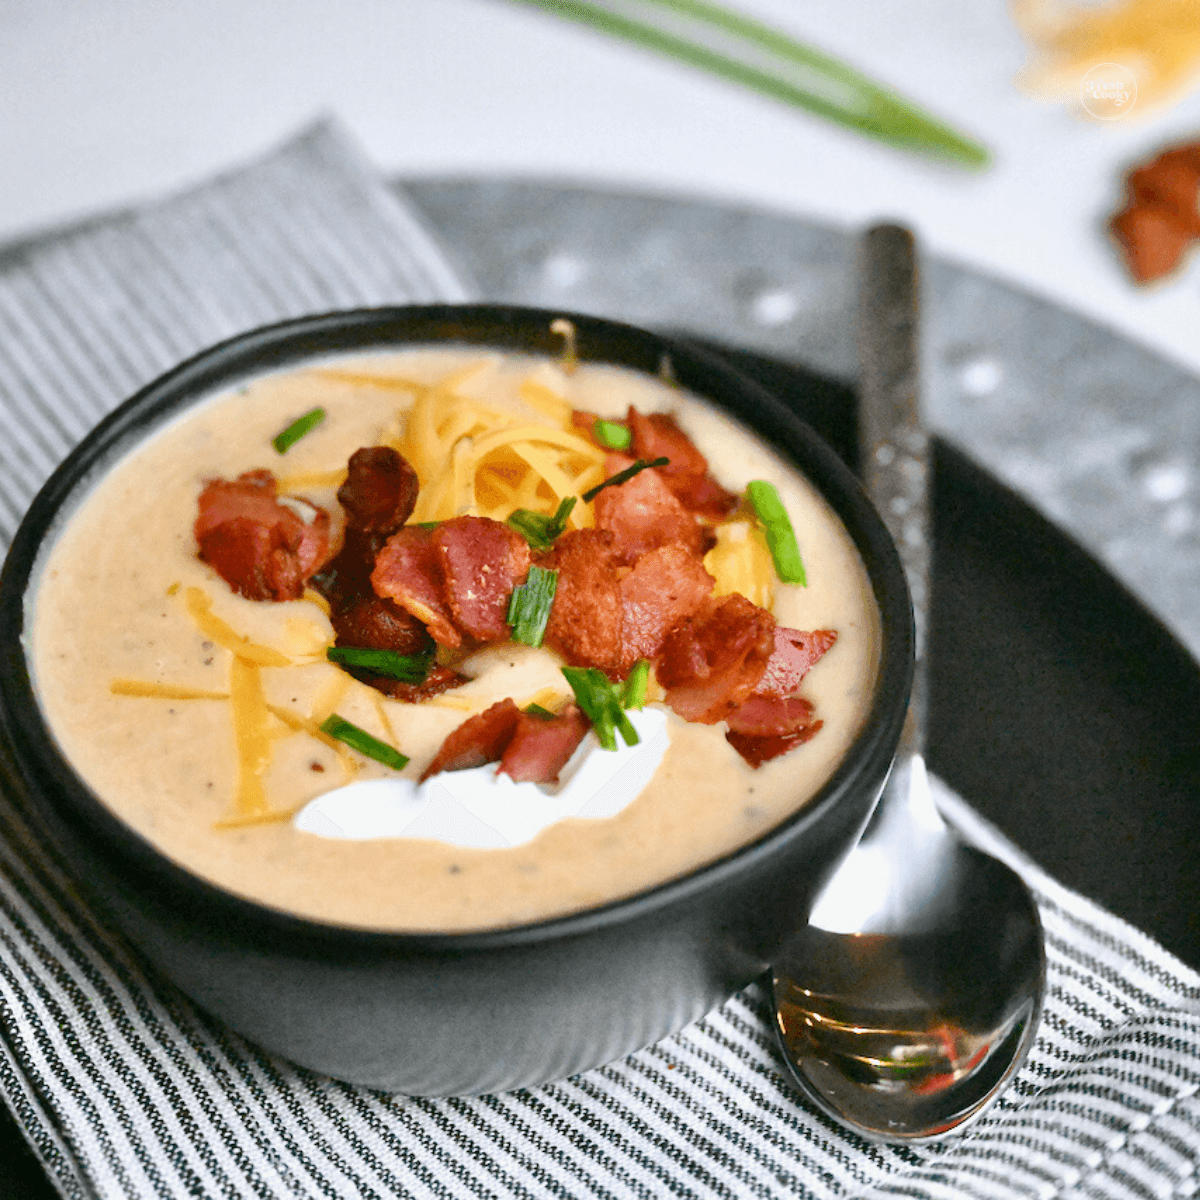 Copycat Outback Loaded Baked Potato soup in bowl topped with bacon, cheese, chives and sour cream.